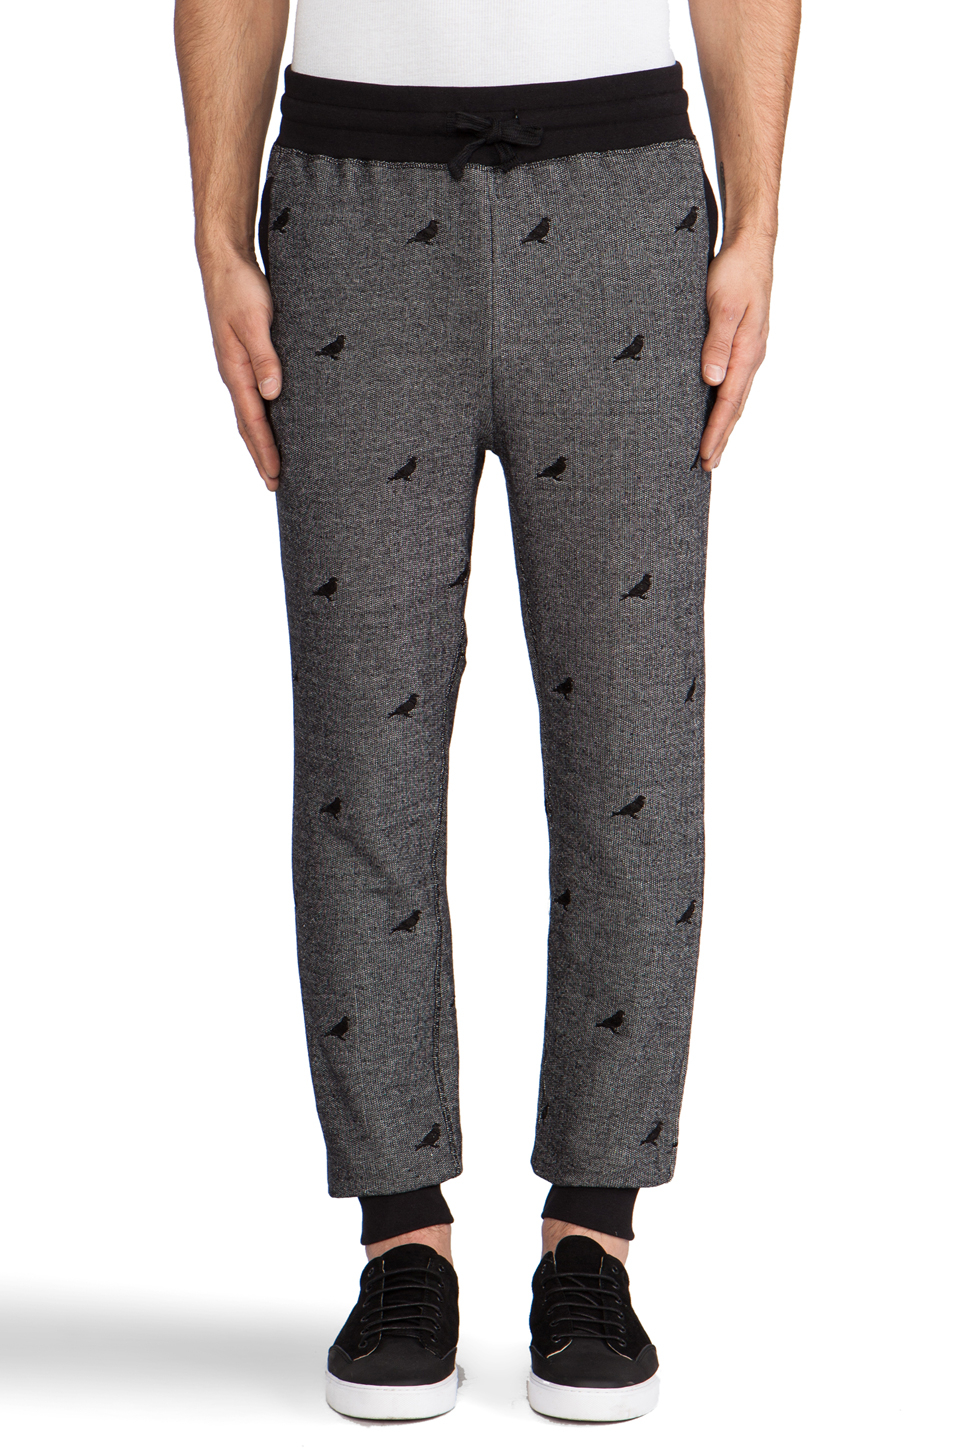 Staple Woolworth Sweatpant in Gray in Black for Men - Lyst